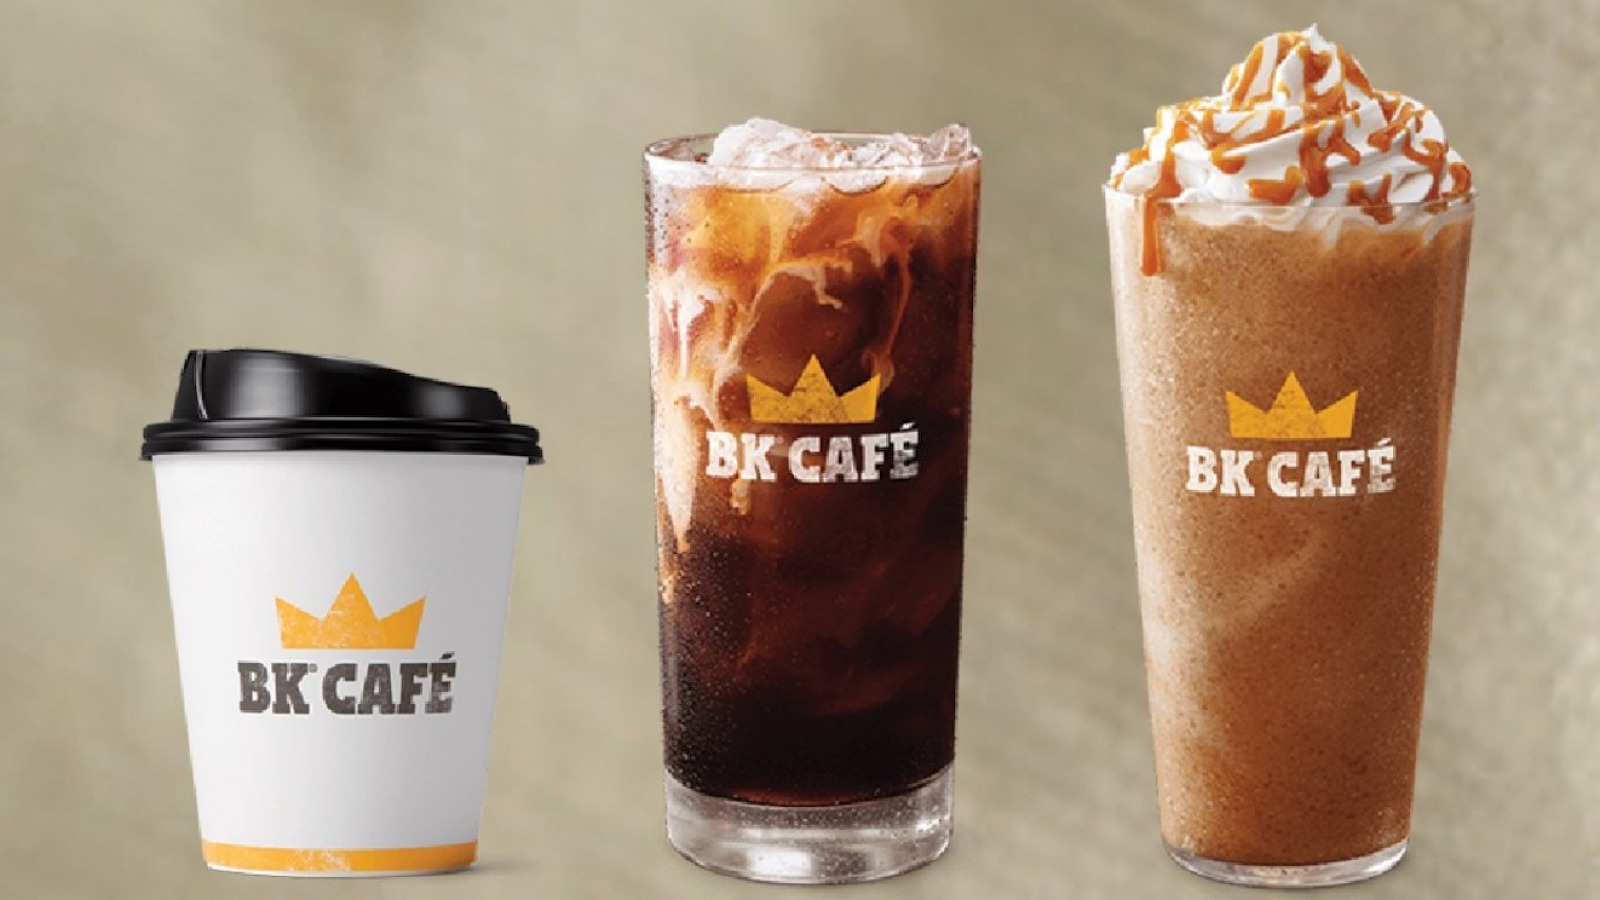 You Should Never Drink Coffee From Burger King. Here's Why